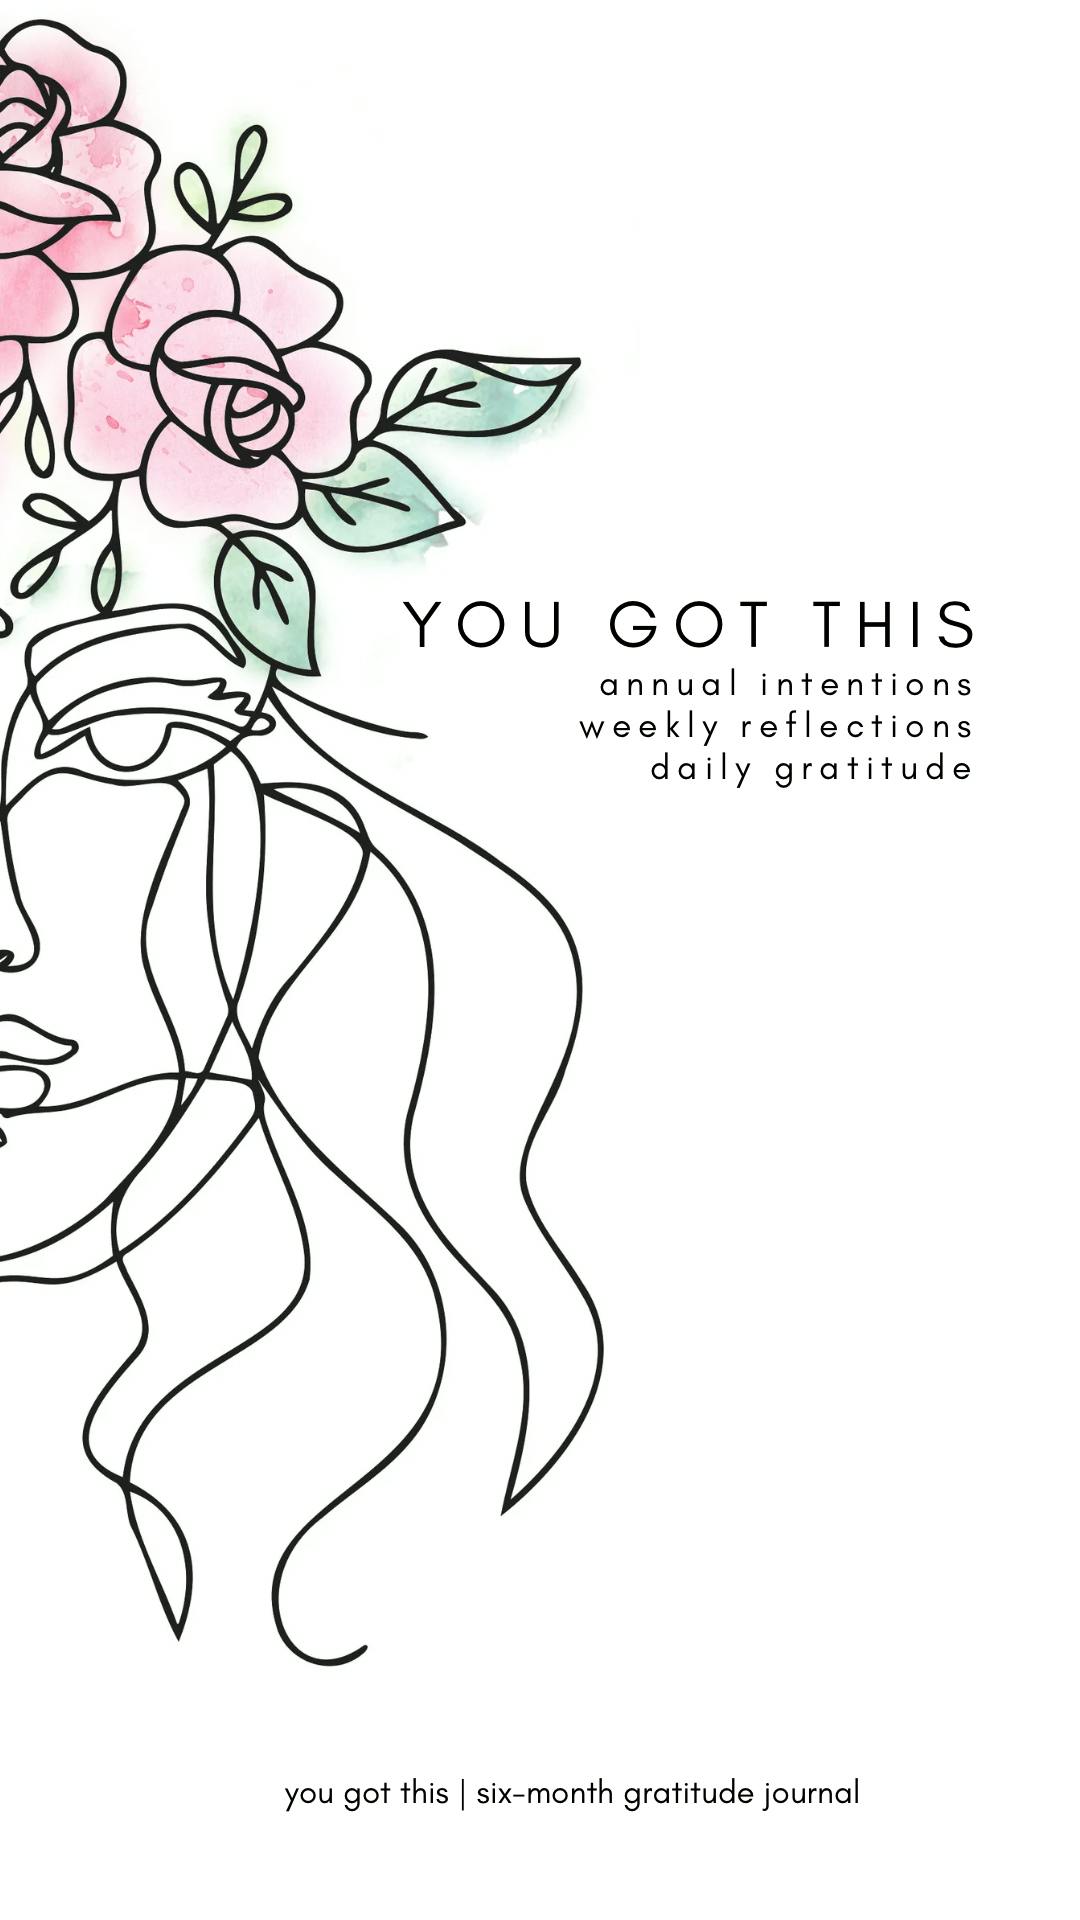 You Got This: annual intentions, weekly reflections, daily gratitude